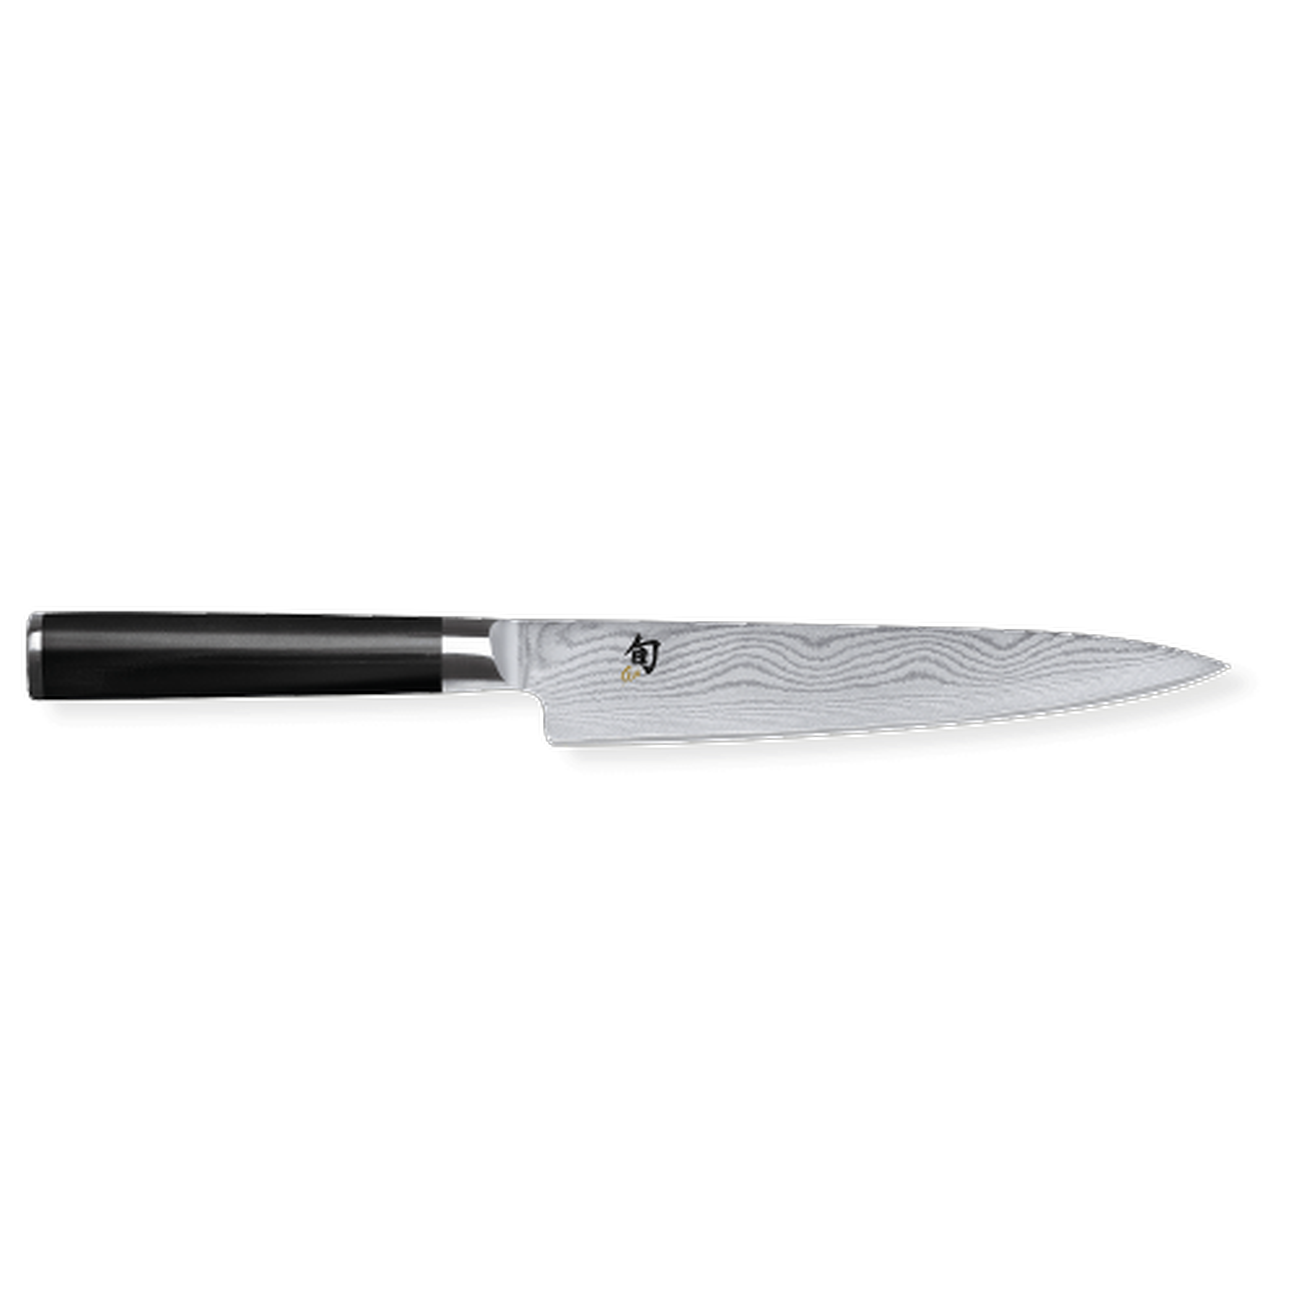 https://www.thekitchenwhisk.ie/contentFiles/productImages/Large/Kai-Shun-Classic-Utility-Knife-6in-15cm.png